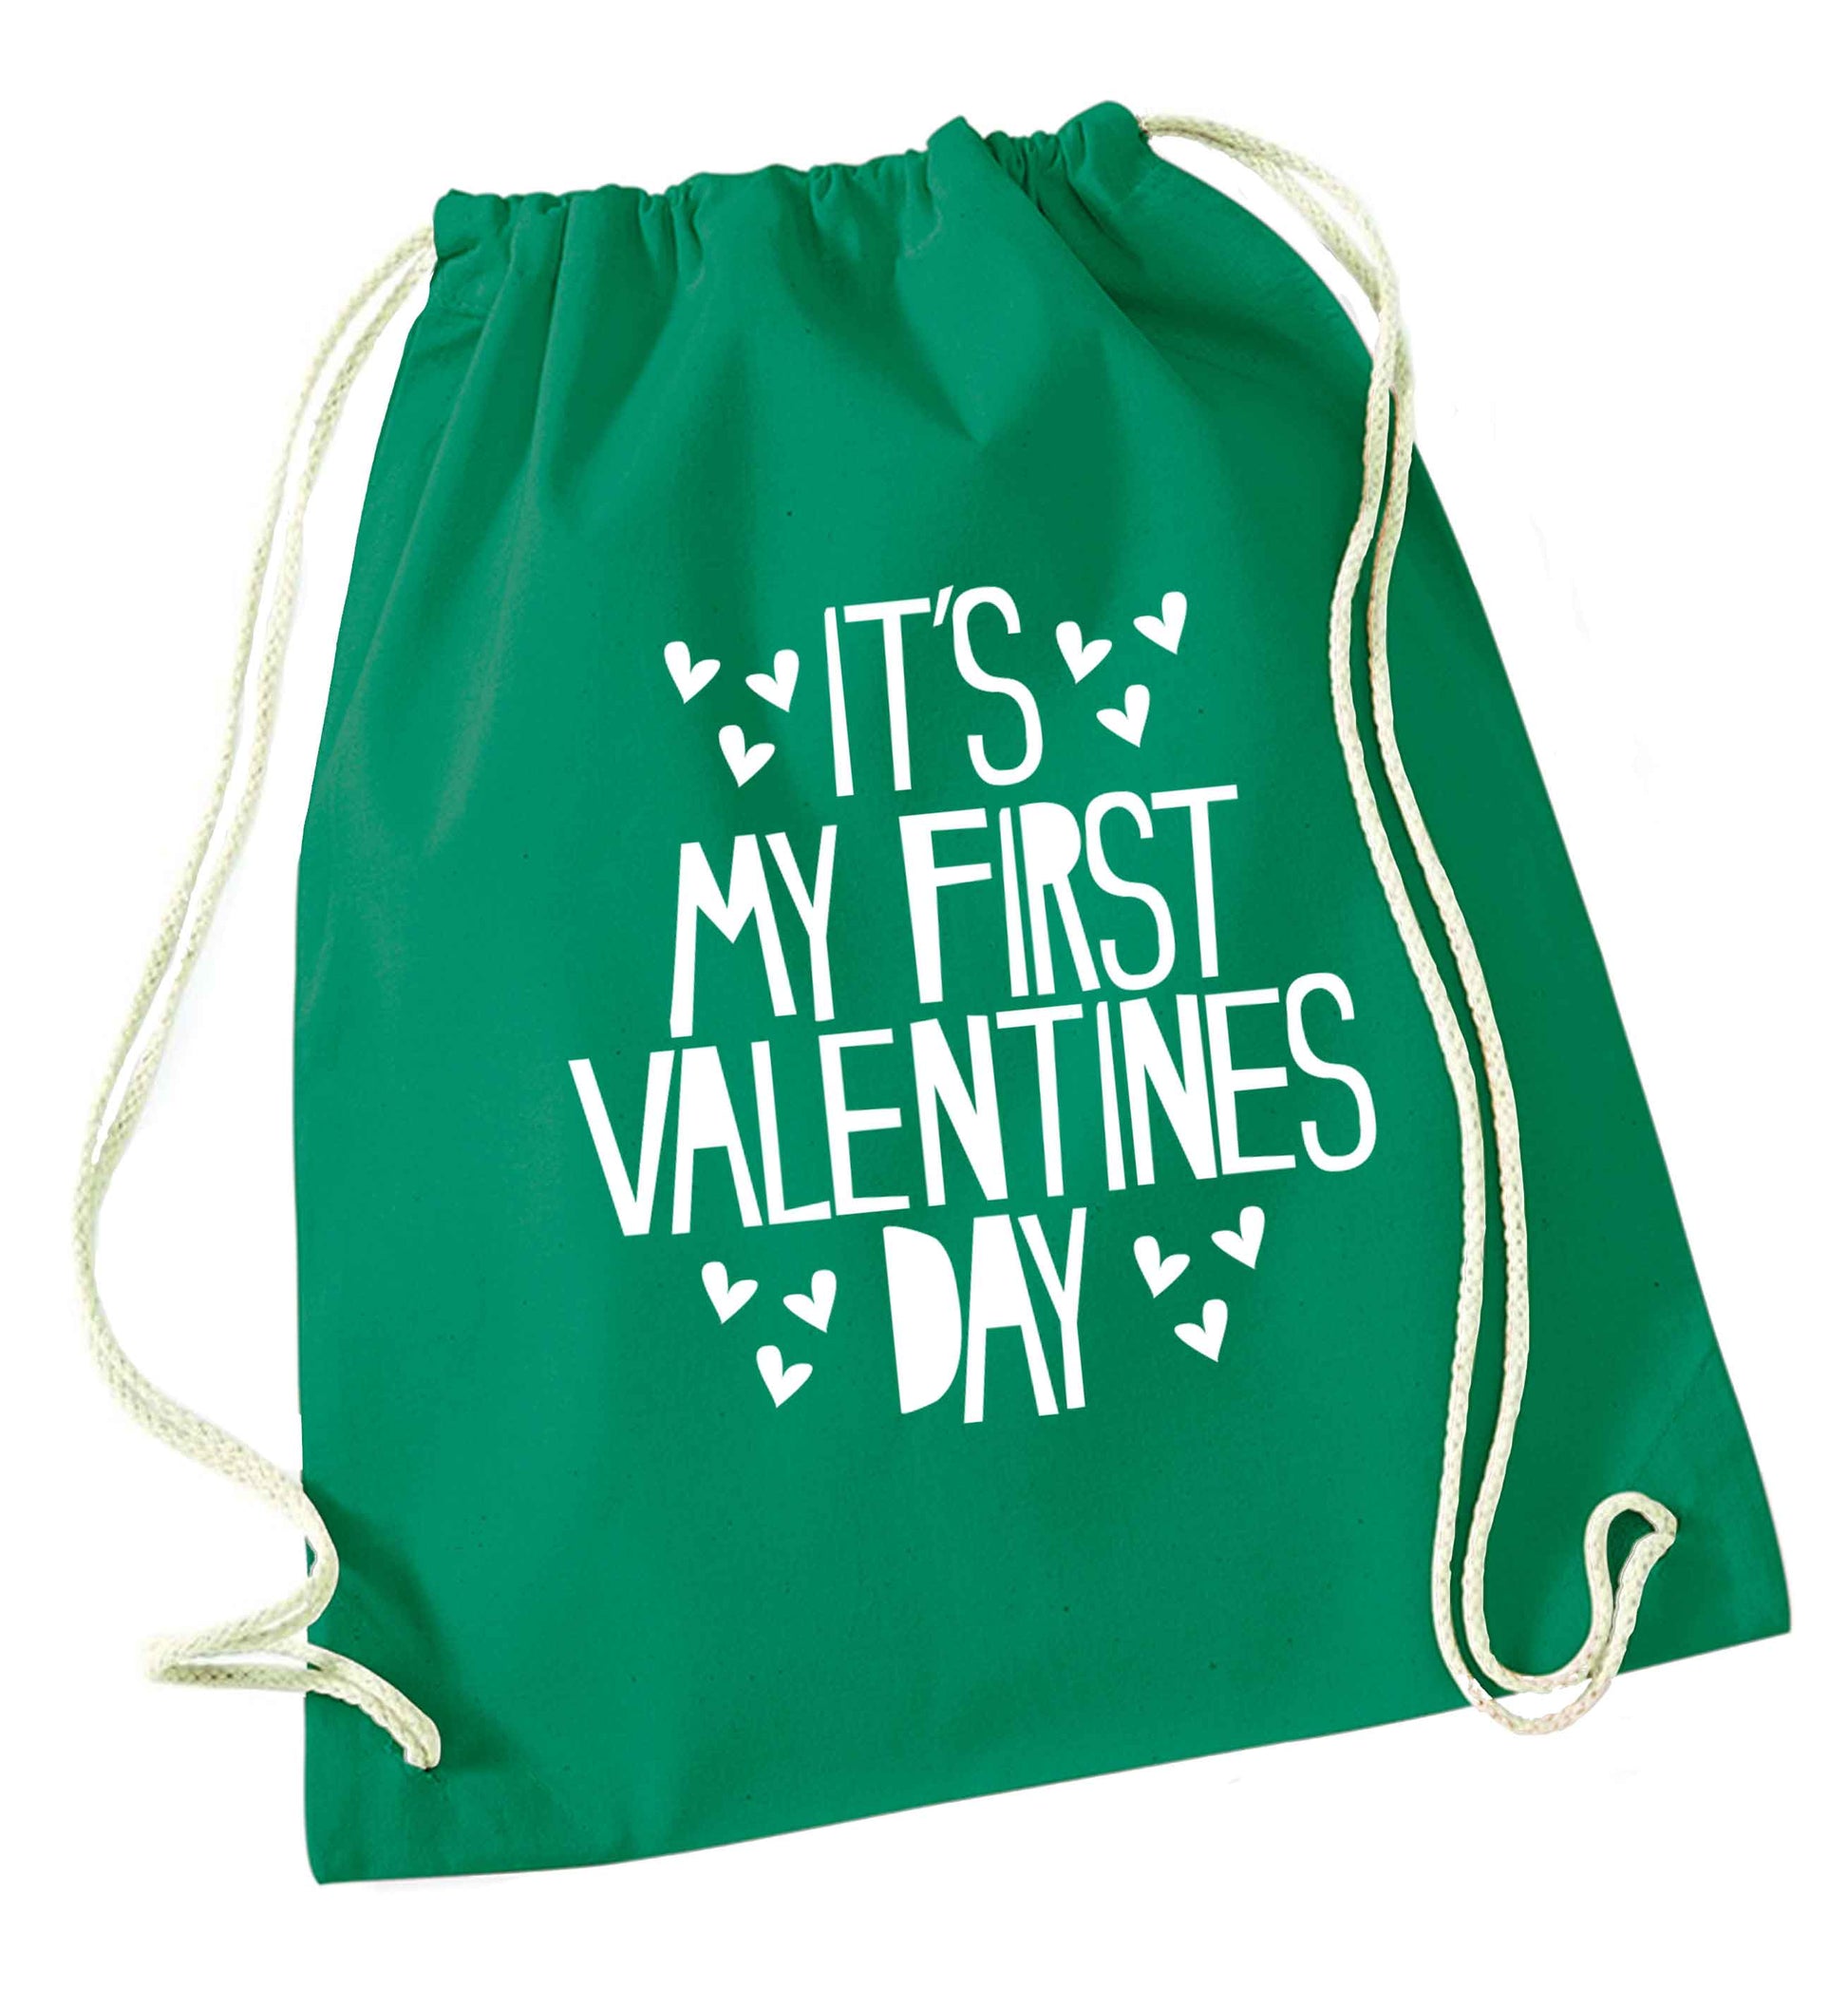 Hearts It's my First Valentine's Day green drawstring bag